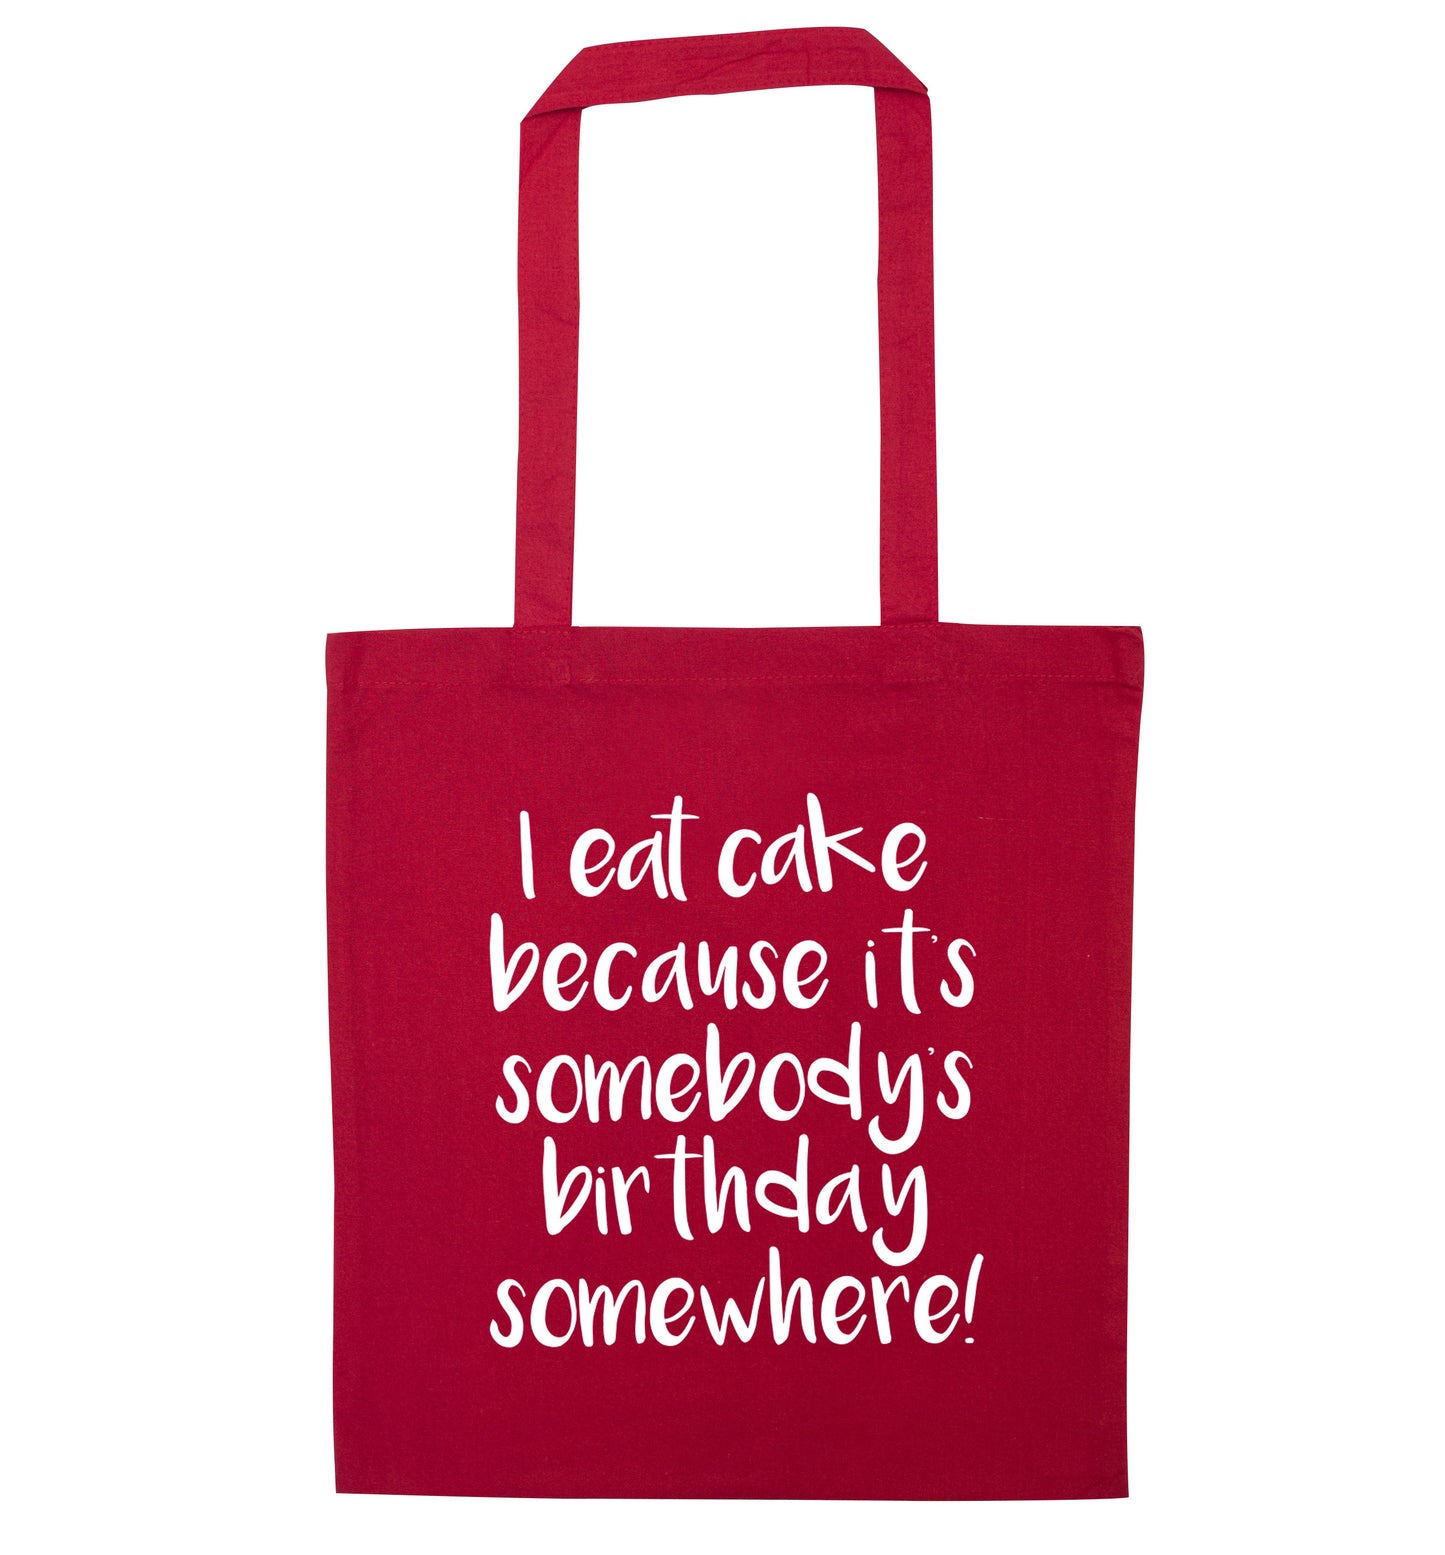 I eat cake because it's somebody's birthday somewhere! red tote bag